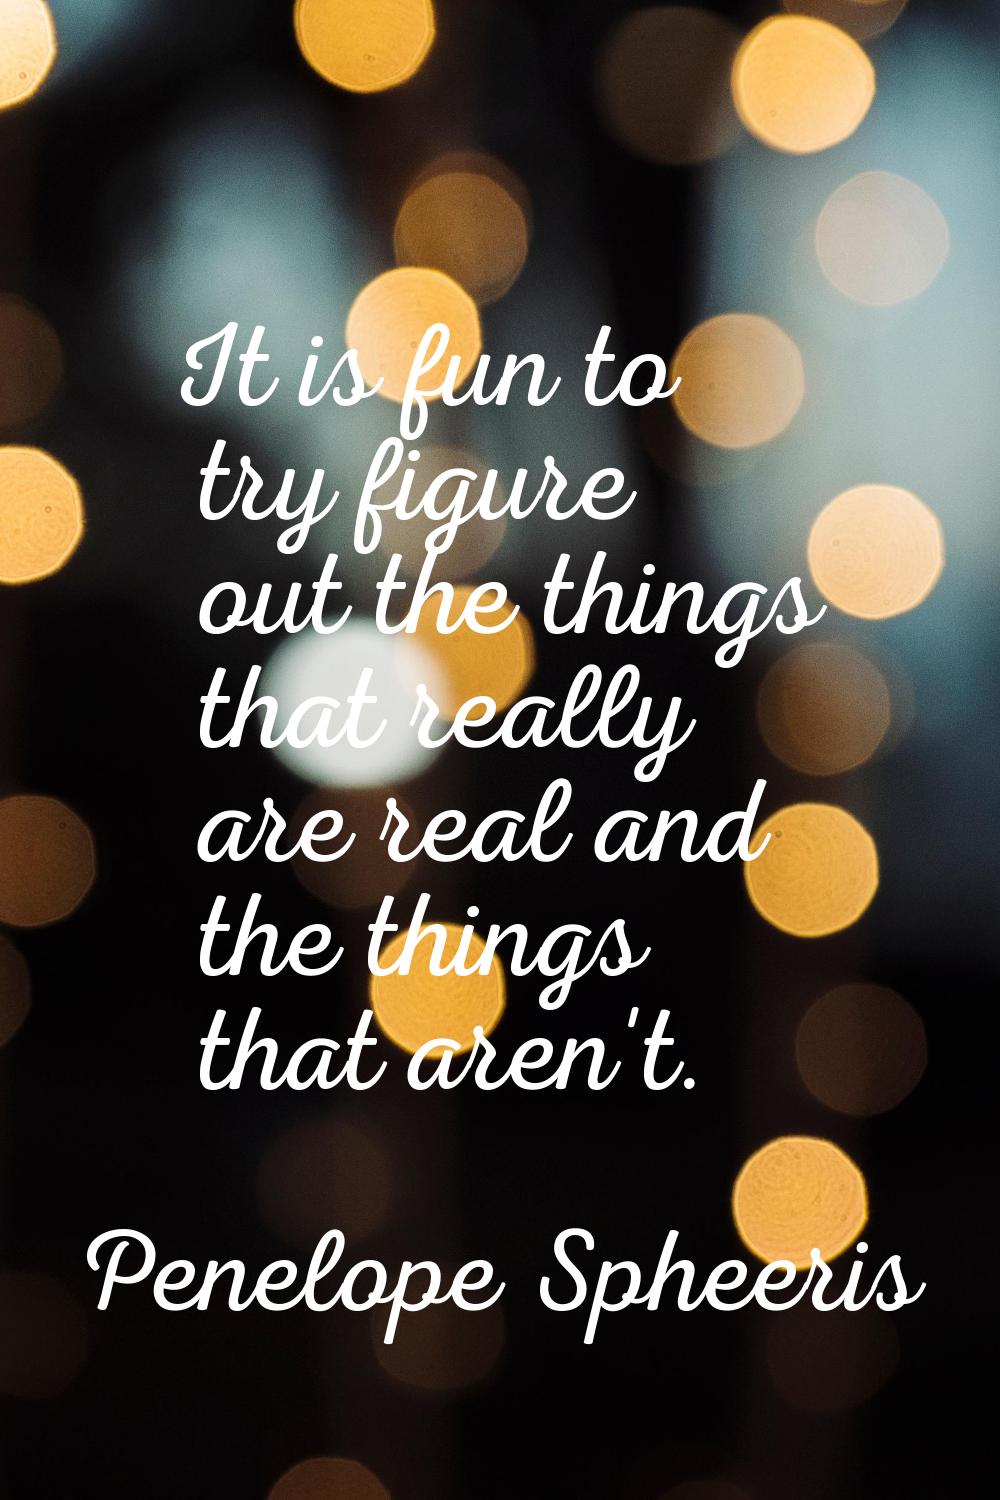 It is fun to try figure out the things that really are real and the things that aren't.